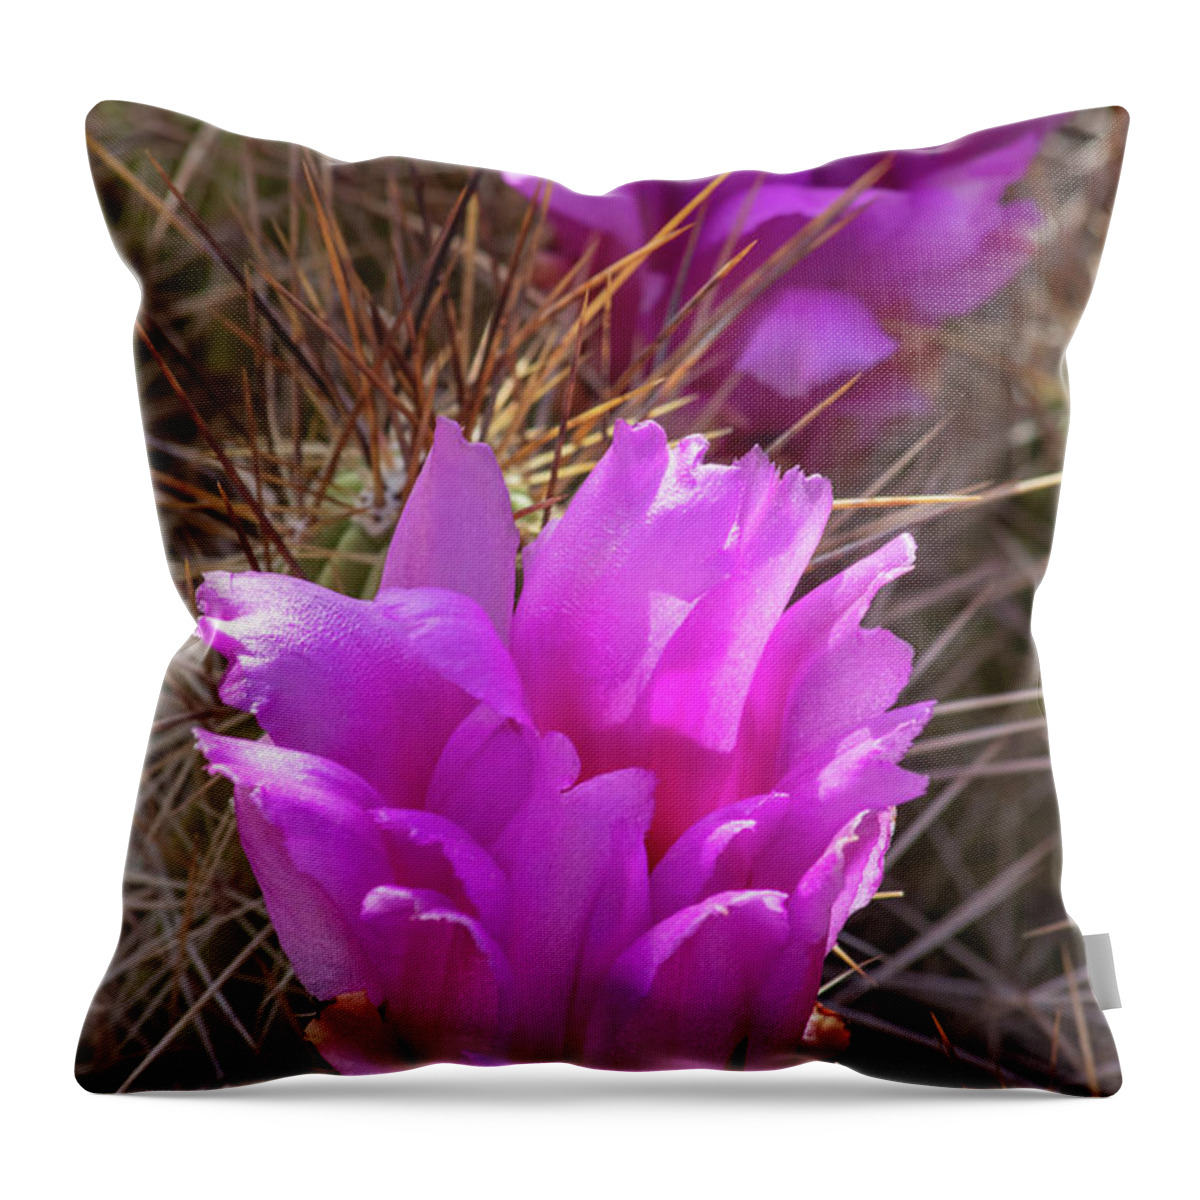 Hedghog Cactus Throw Pillow featuring the photograph Strawberry Hedgehog Cactus Flowers by Elisabeth Lucas